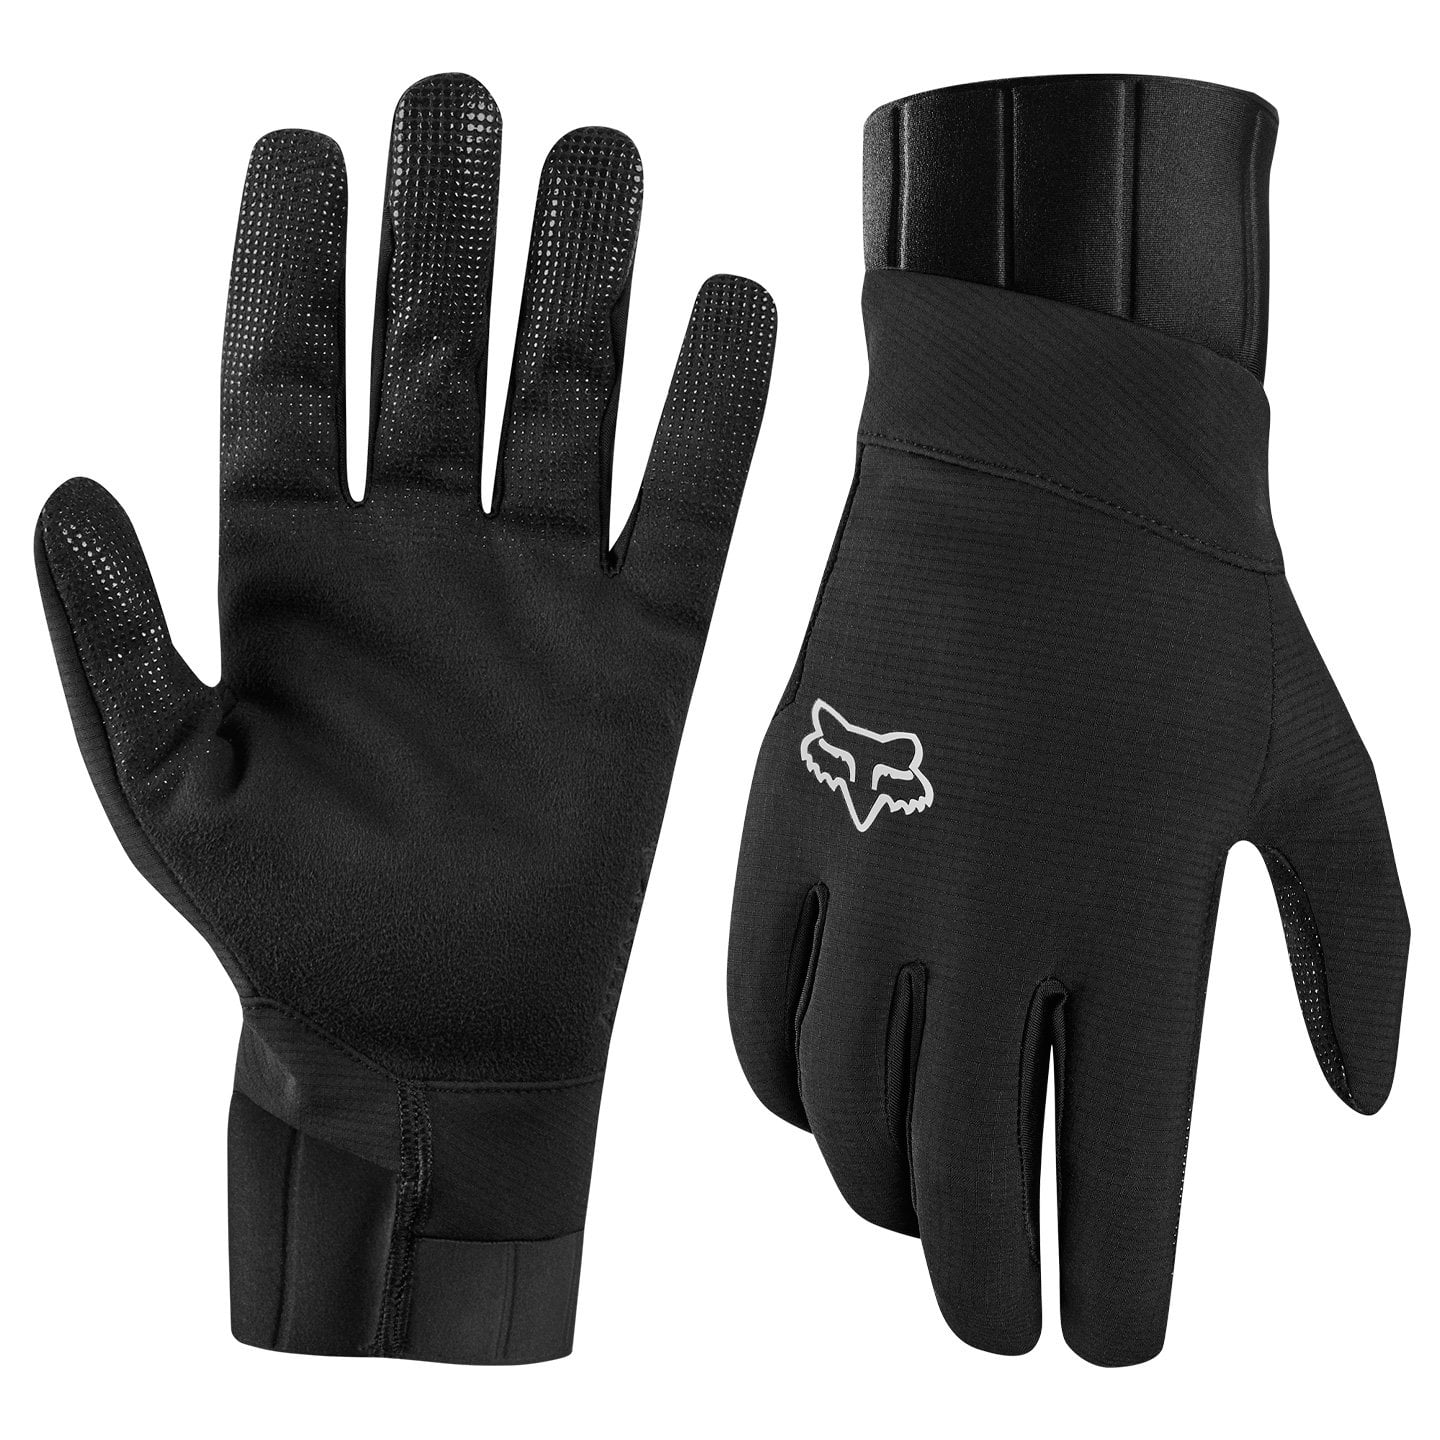 FOX Defend Pro Fire Full Finger Gloves Cycling Gloves, for men, size L, Cycling gloves, Bike gear